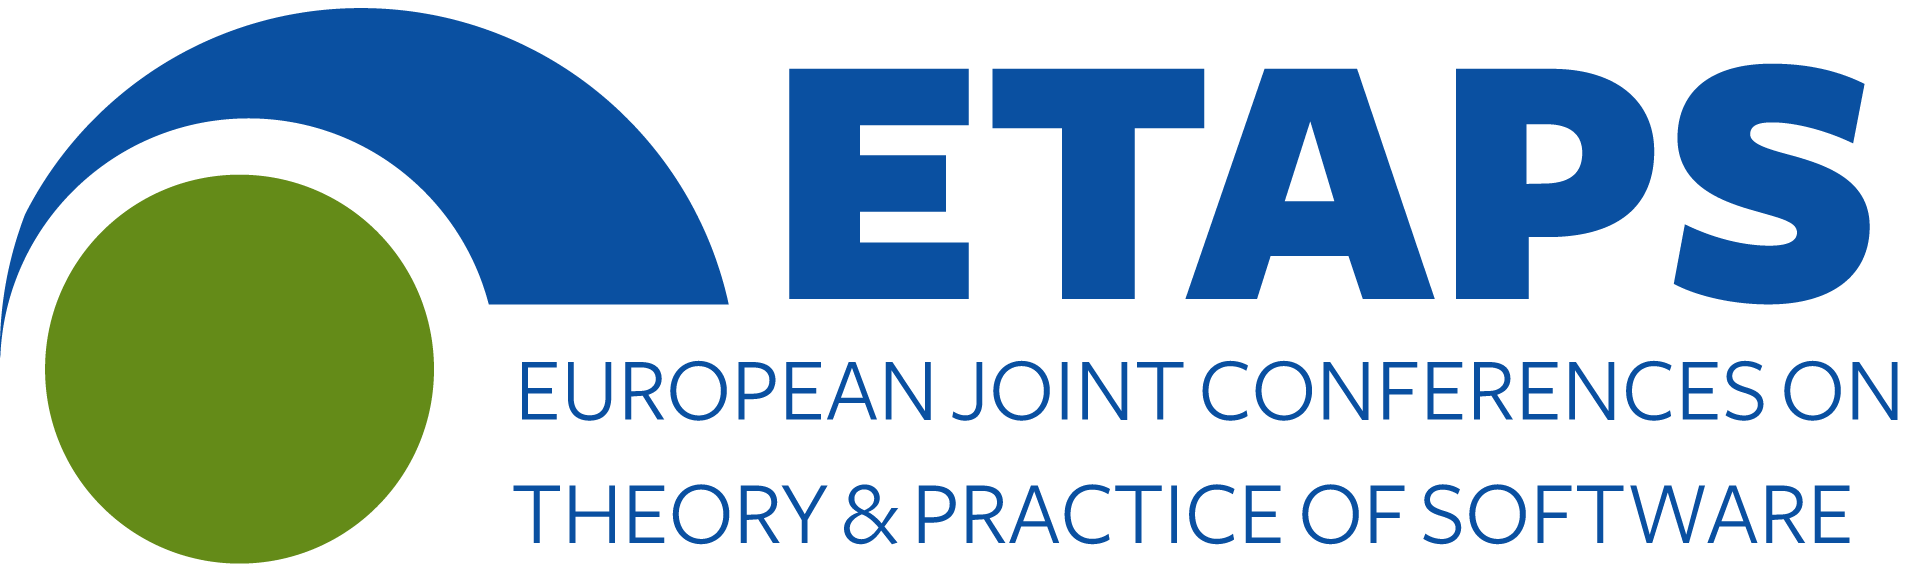 ETAPS (The European Joint Conferences on Theory and Practice of Software)